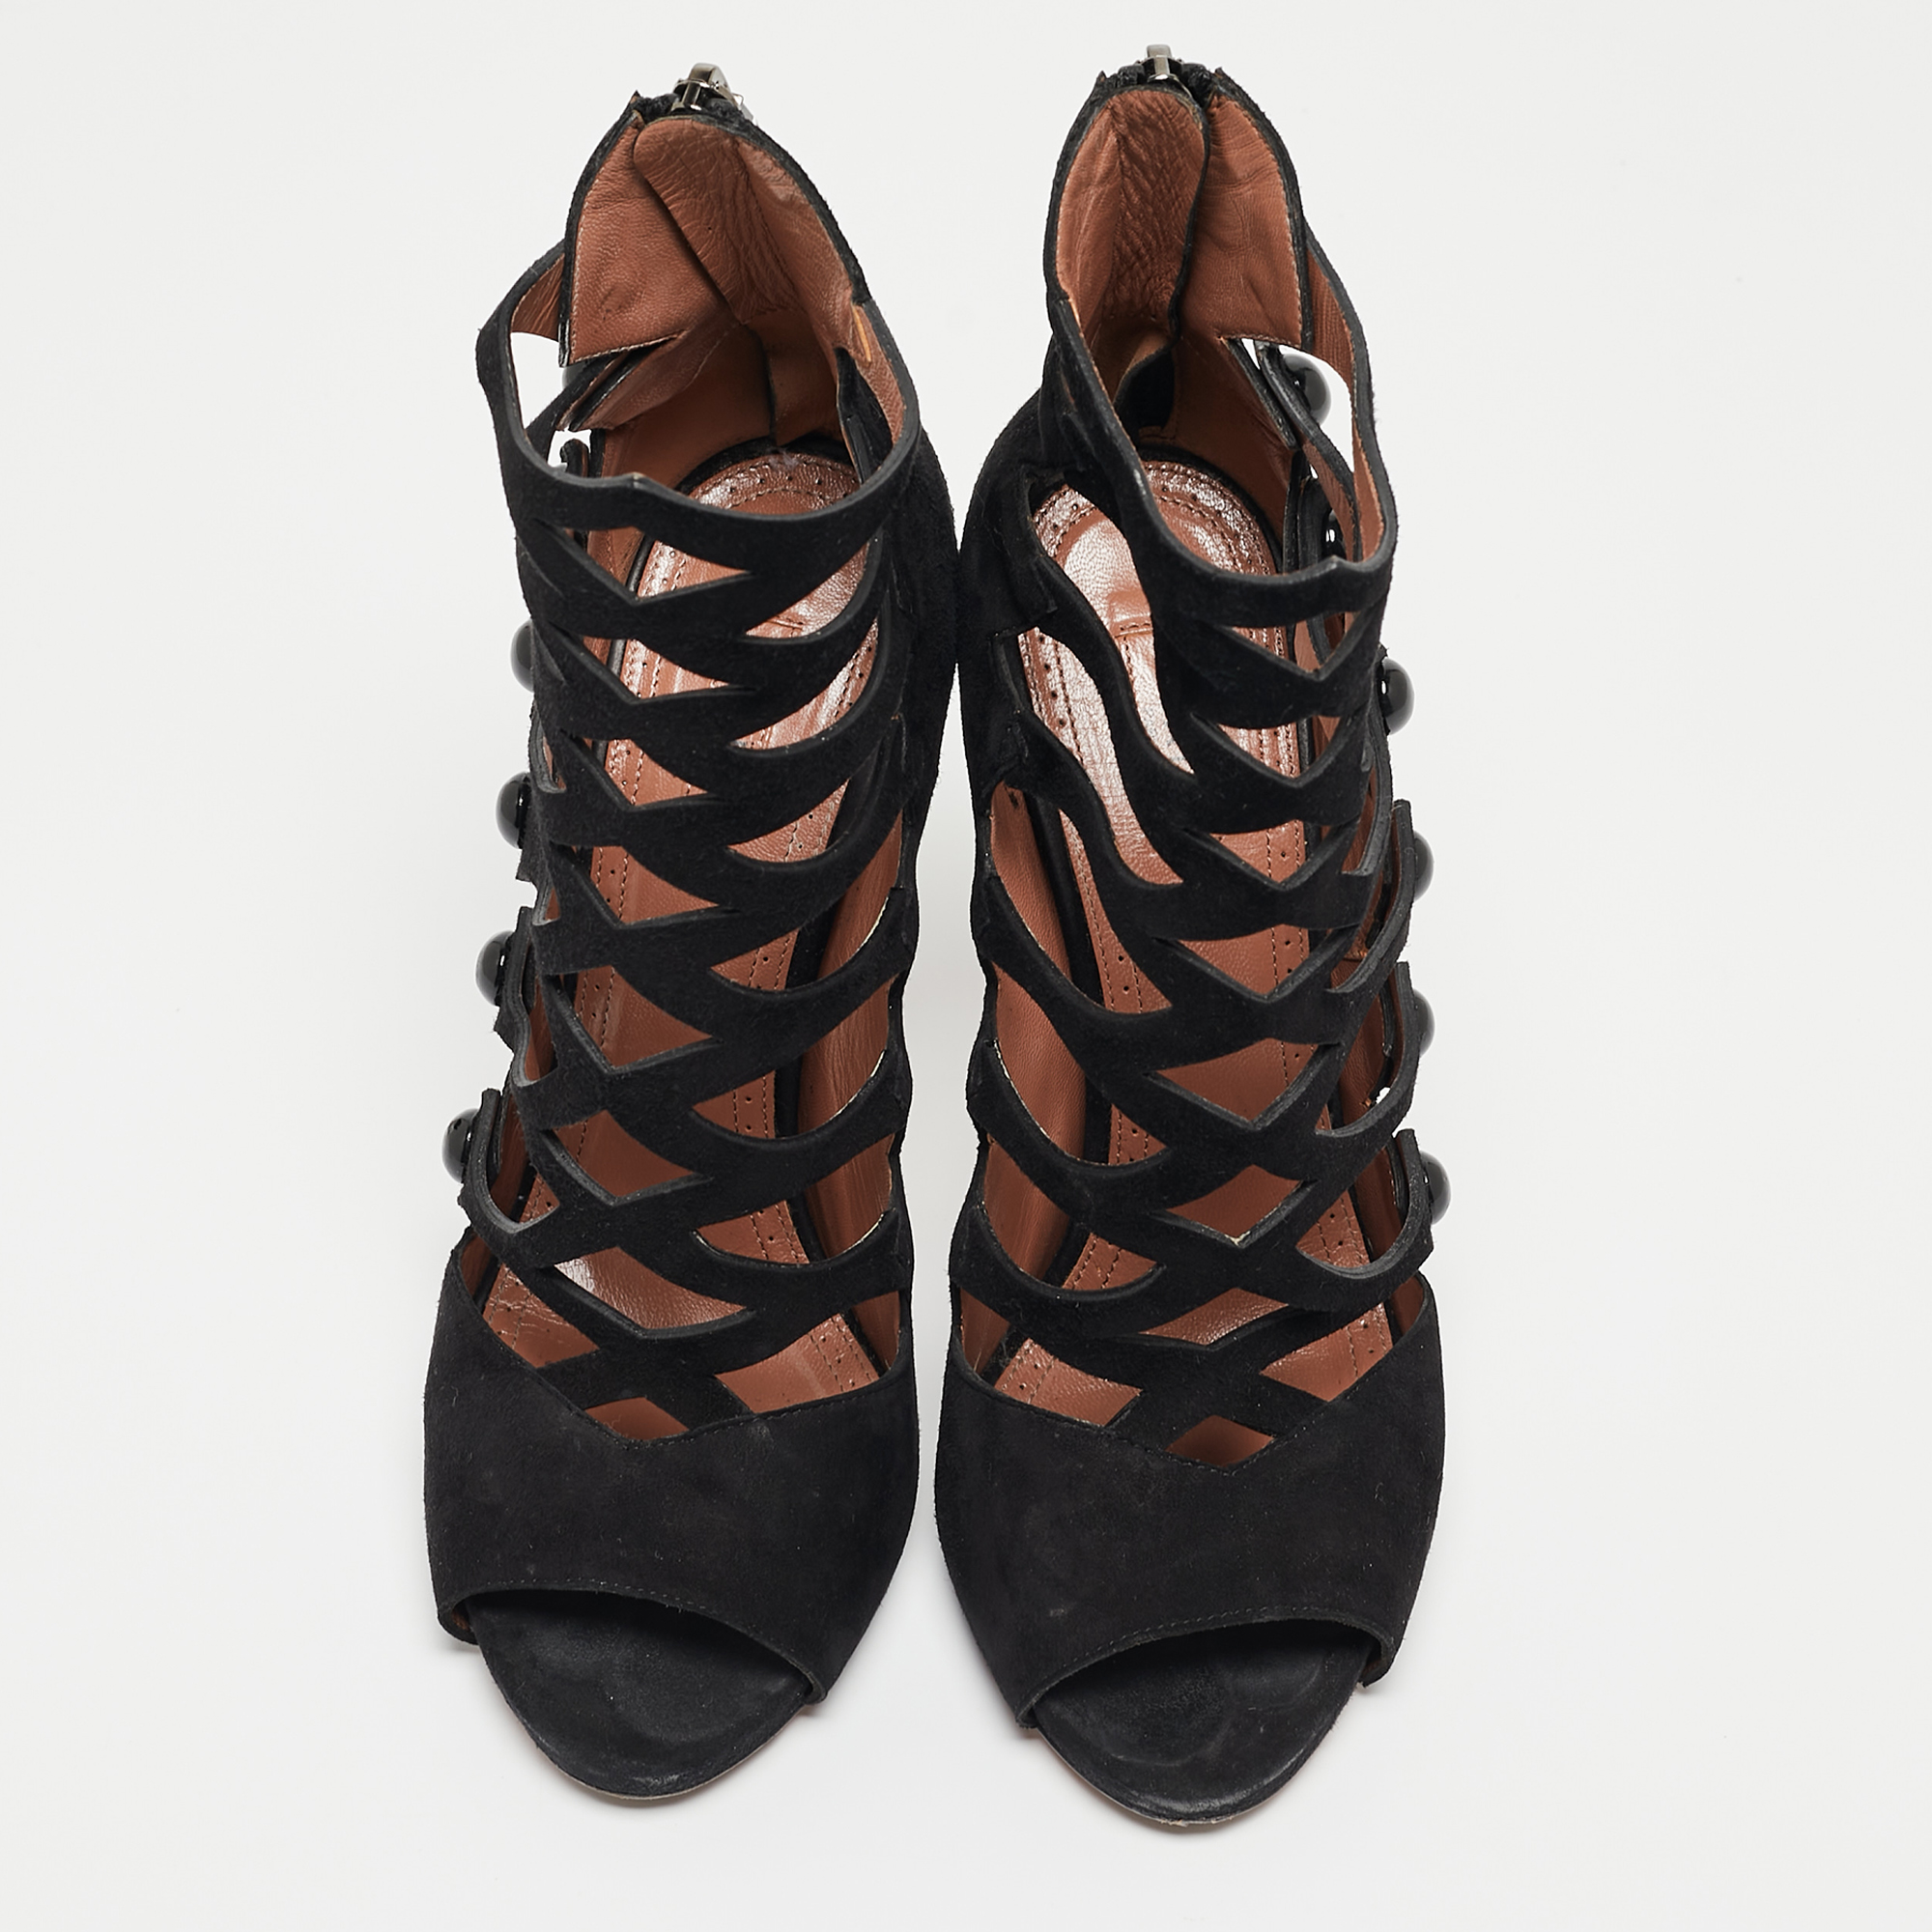 Alaia Black Suede Open Toe Caged Ankle Sandals Size 37